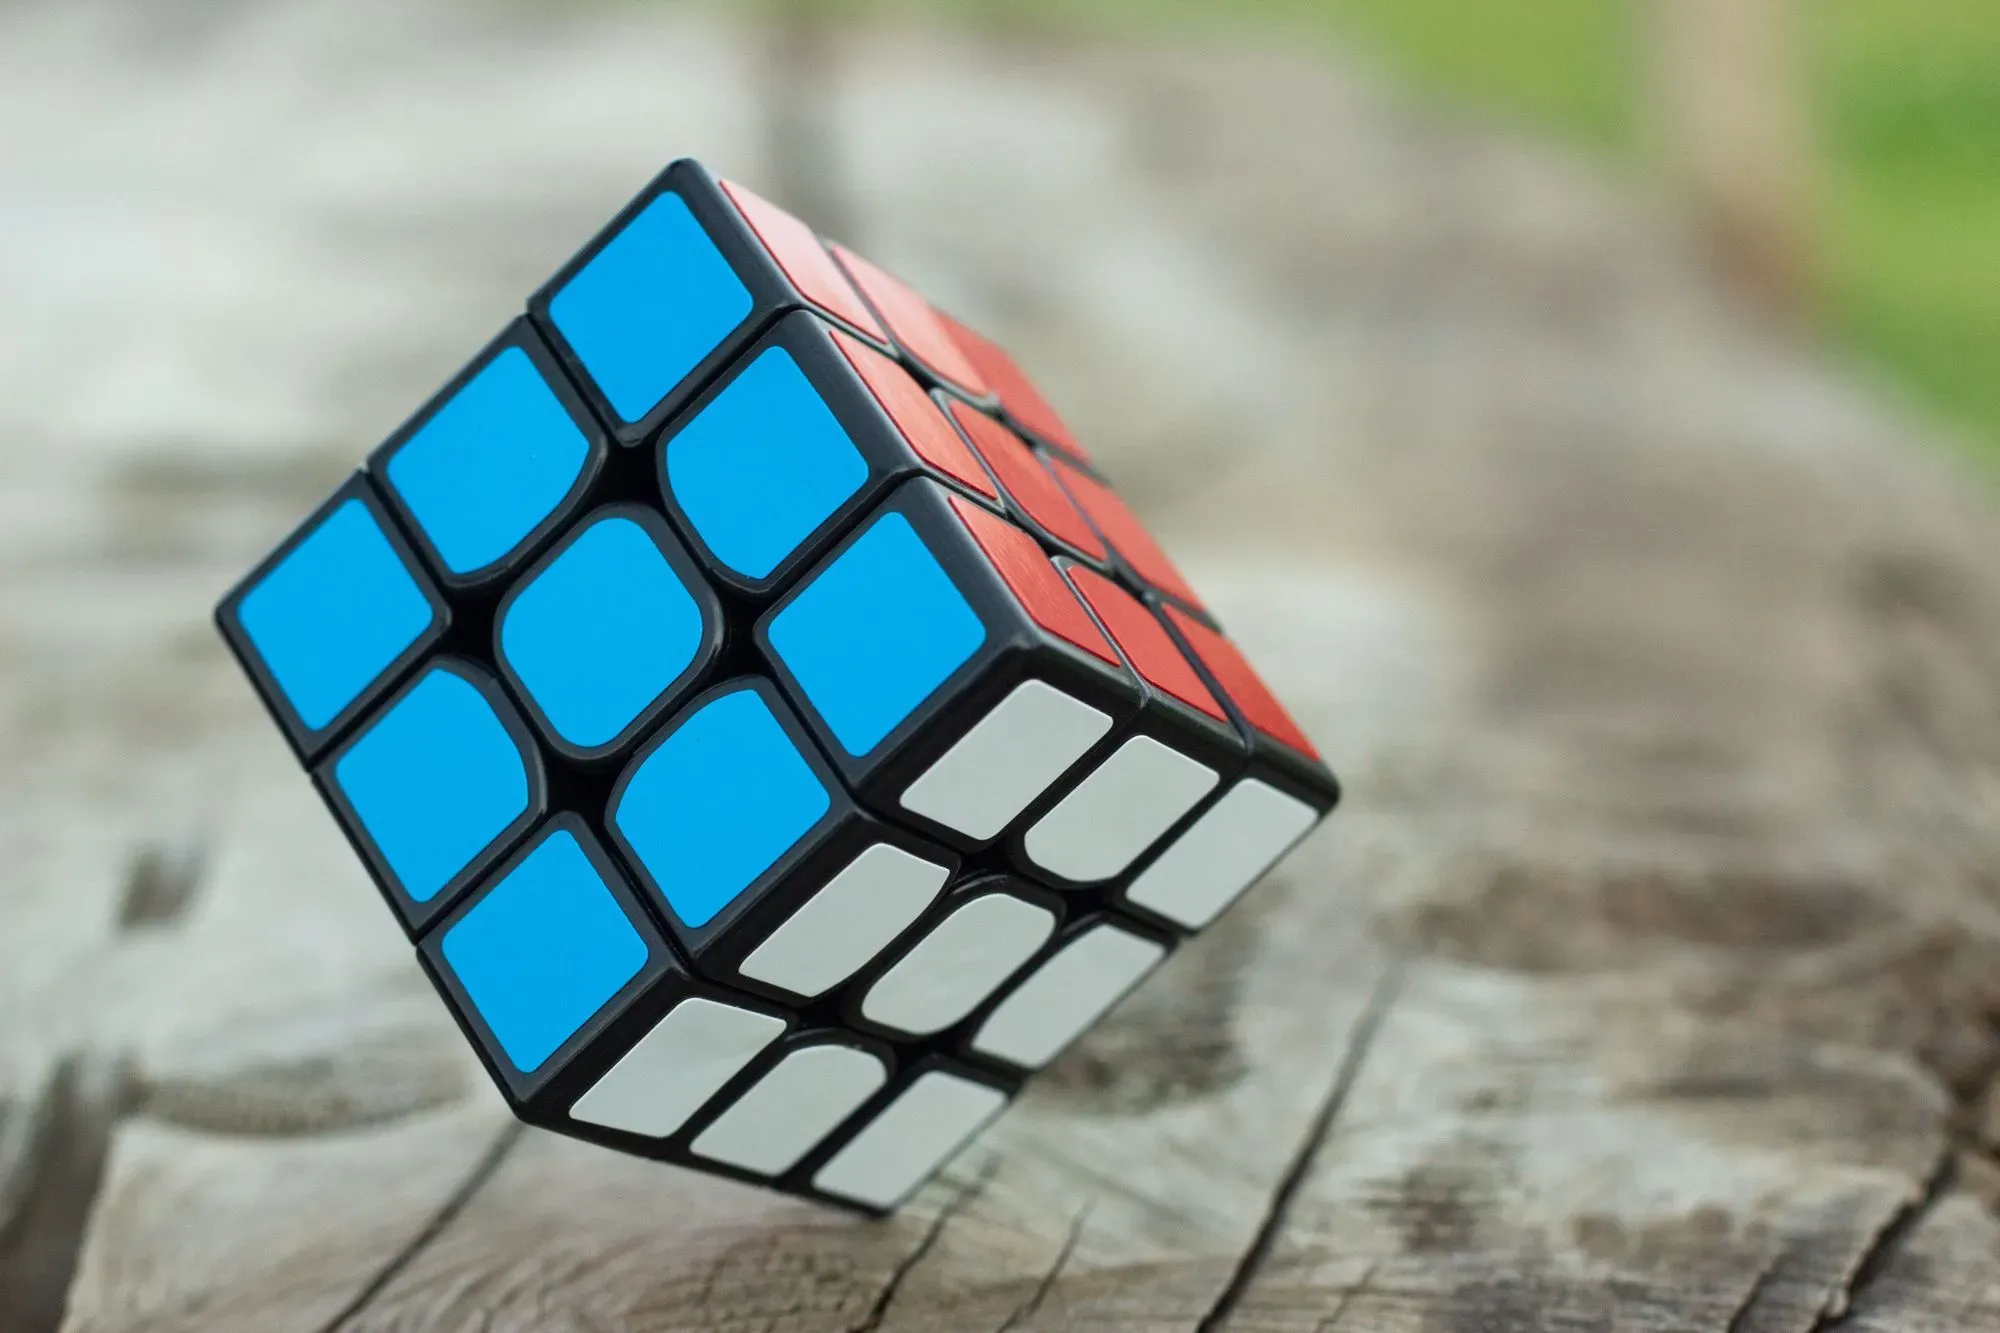 How many edges does a cube have? Let's find out the answer.